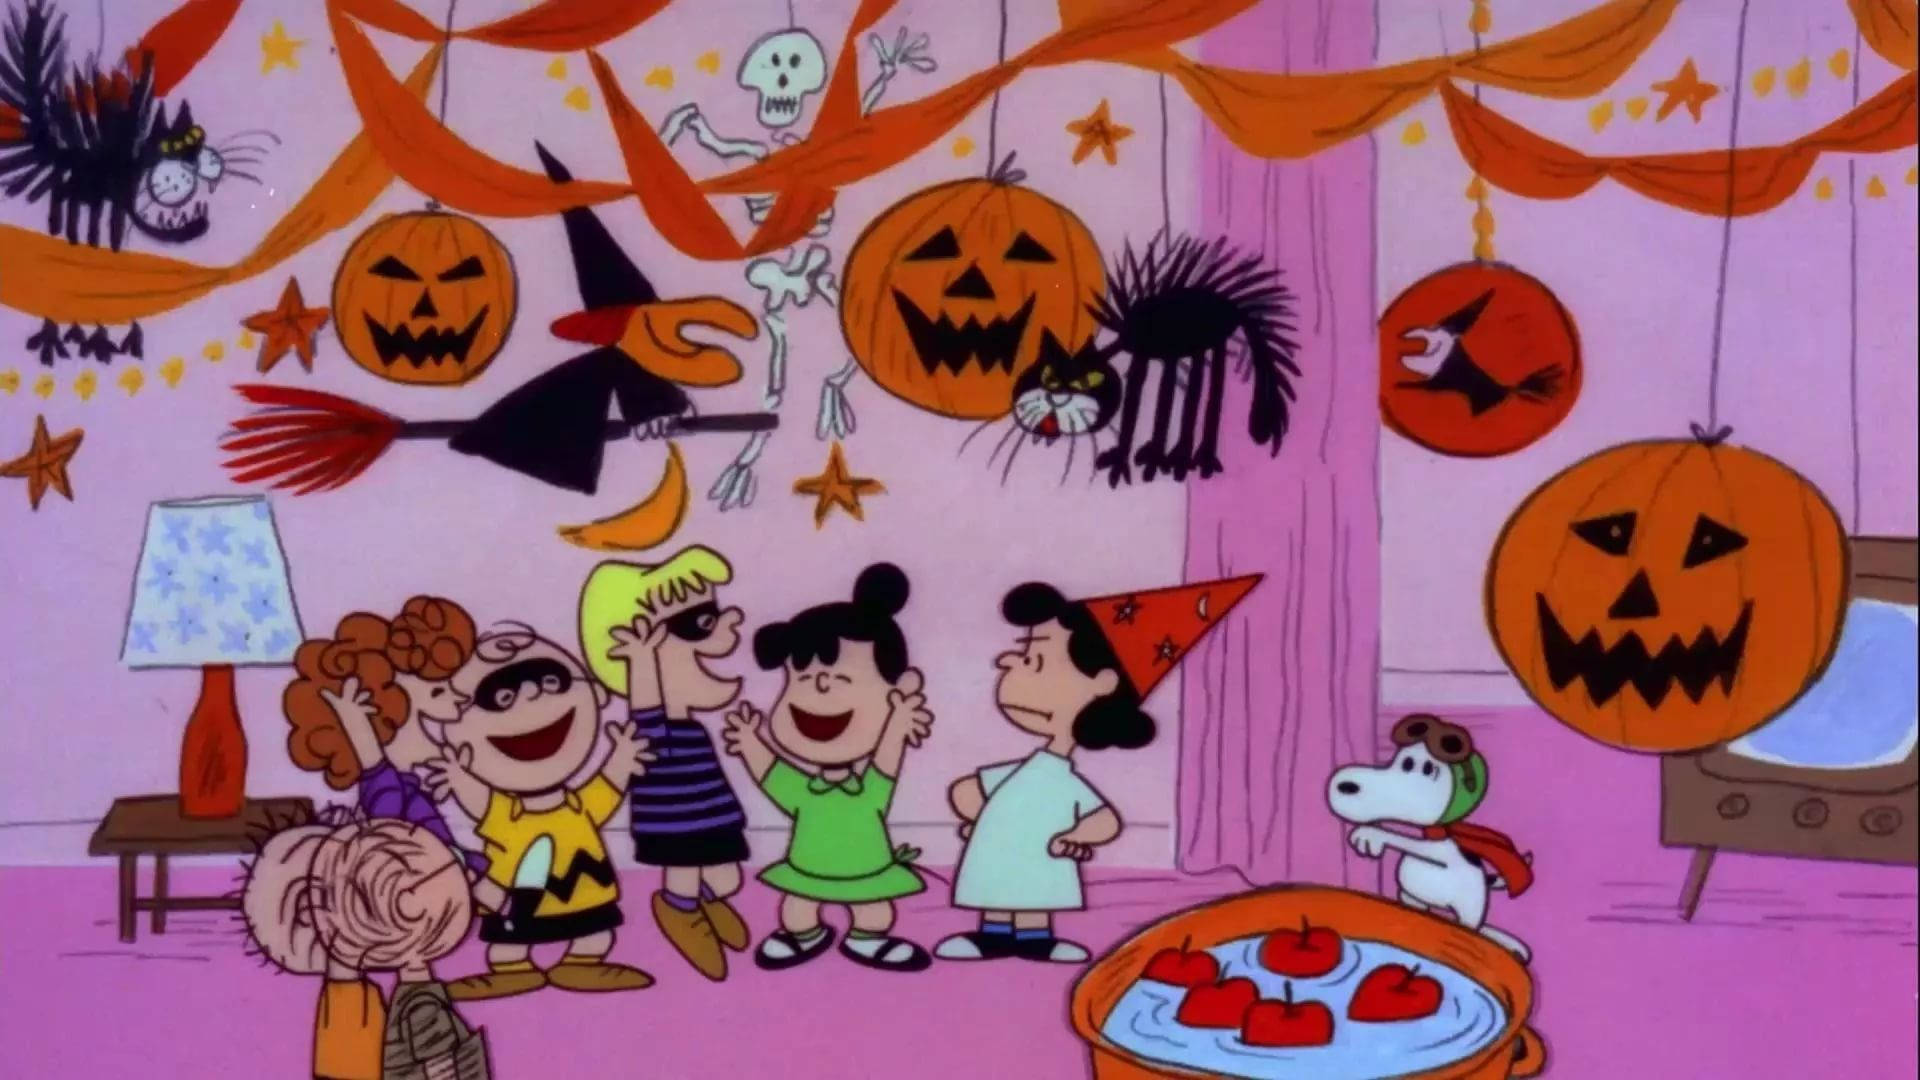 Cute Aesthetic Halloween Peanuts Party